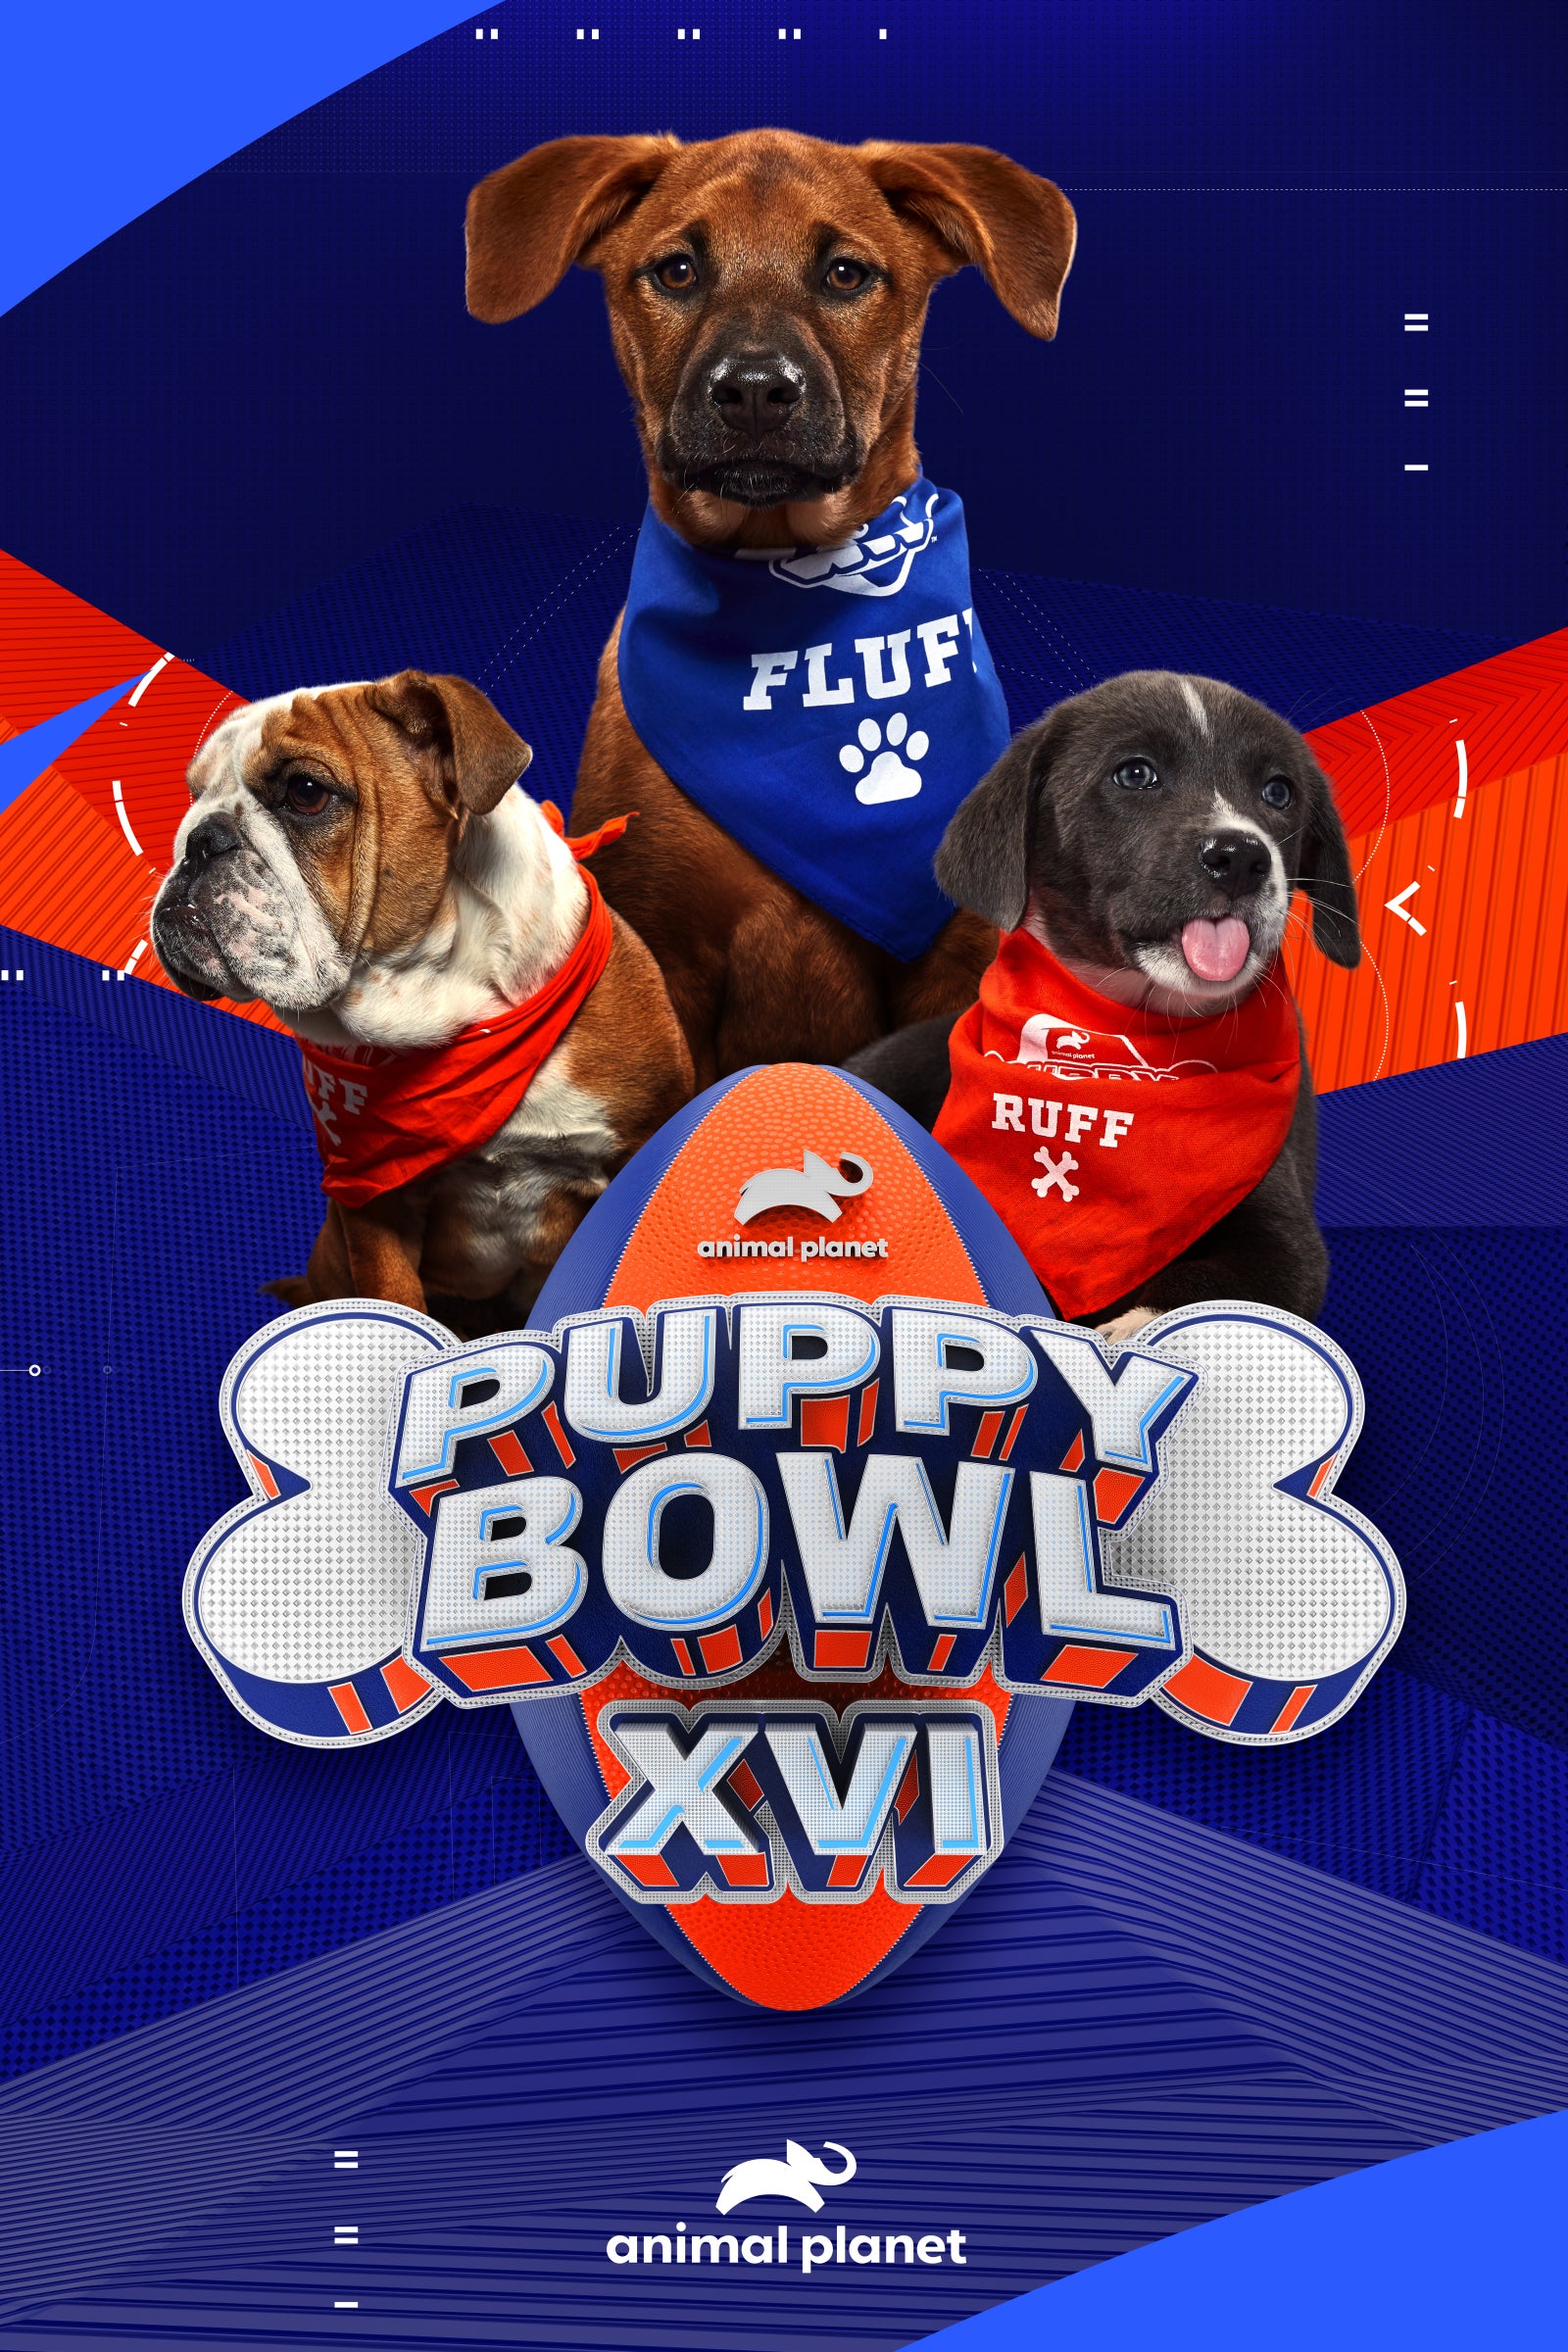 TV ratings for Puppy Bowl in South Korea. Animal Planet TV series